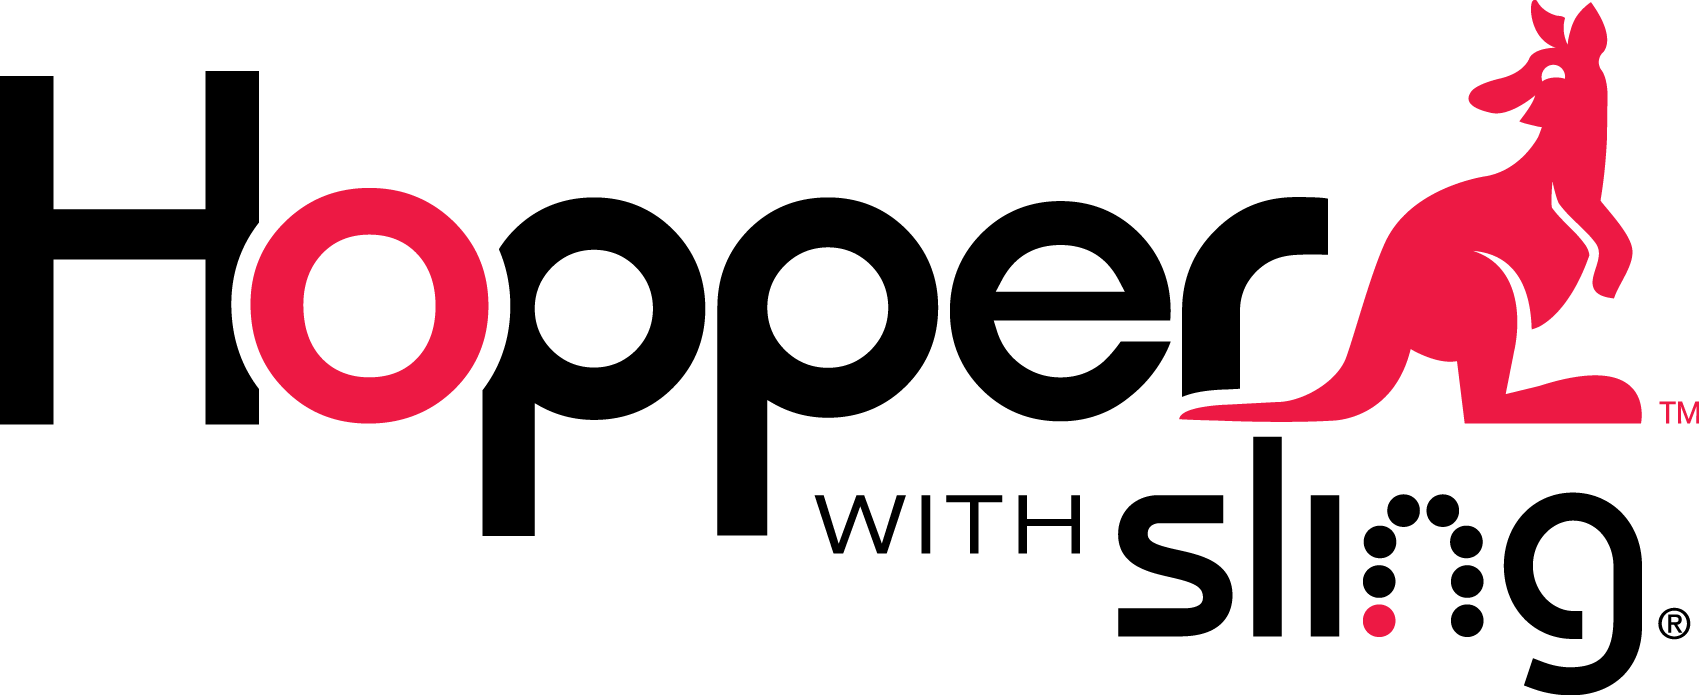 Hopper Logo - Dish Hopper with Sling HD Satellite Receiver | Direct Sales